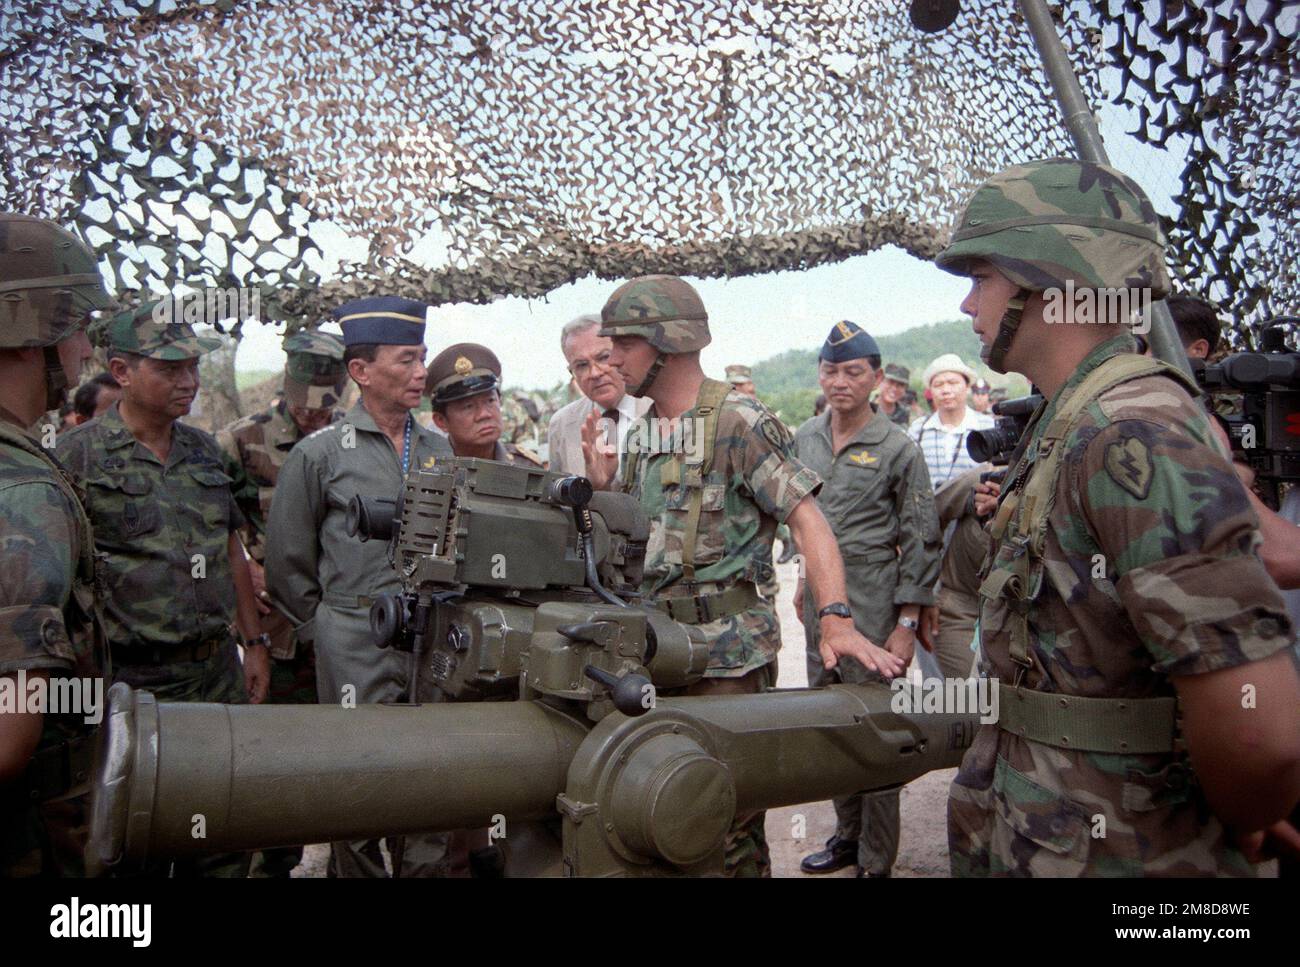 A soldier from 4th Bn., 22nd Inf., 25th Inf. Div. (Light), explains the TOW tube-launched, optically tracked, wire-guided heavy anti-tank weapon to GEN Sundhara Kongsompong, Supreme Commander, Royal Thai Armed Forces, and U.S. Ambassador to Thailand Daniel A. O'Donohue following the opening ceremonies for the combined Thai/U.S. exercise Cobra Gold '90. Subject Operation/Series: COBRA GOLD '90 Base: Chon Buri Country: Thailand (THA) Stock Photo